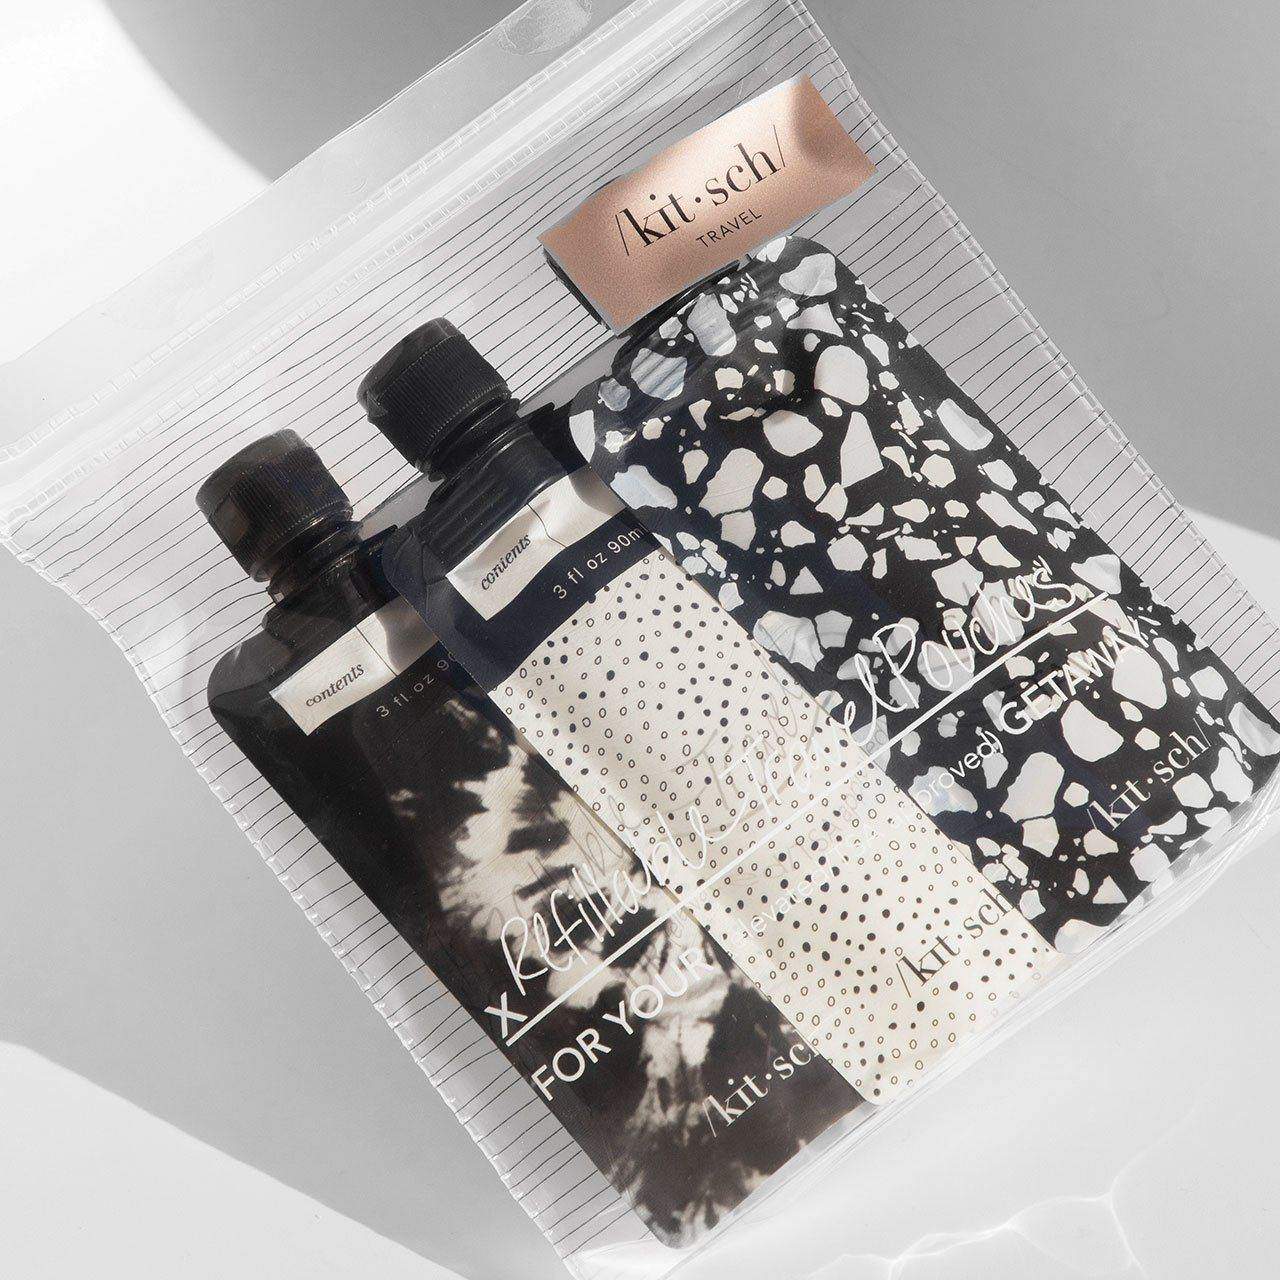 Refillable Travel Pouch 3pc set - Black & Ivory by KITSCH